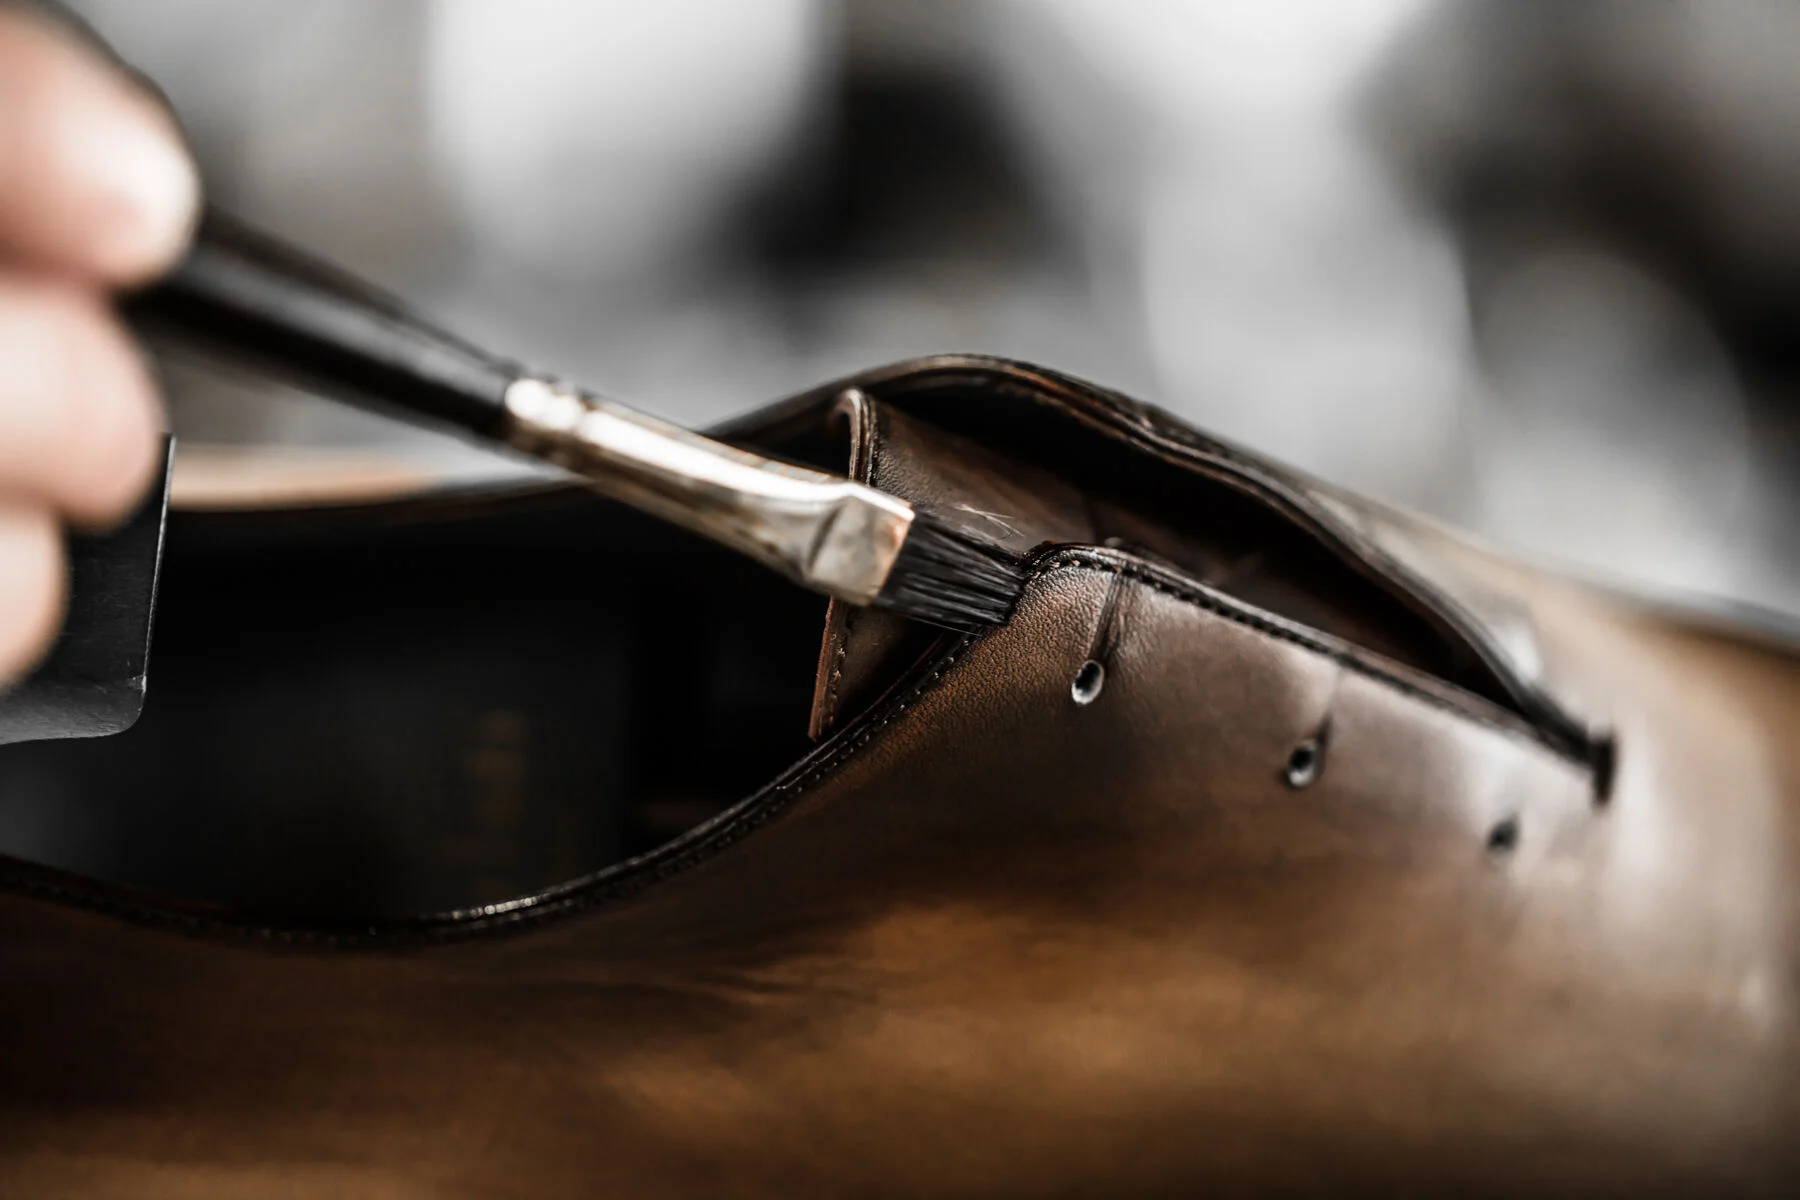 : When should you bring in shoes for their first patina?